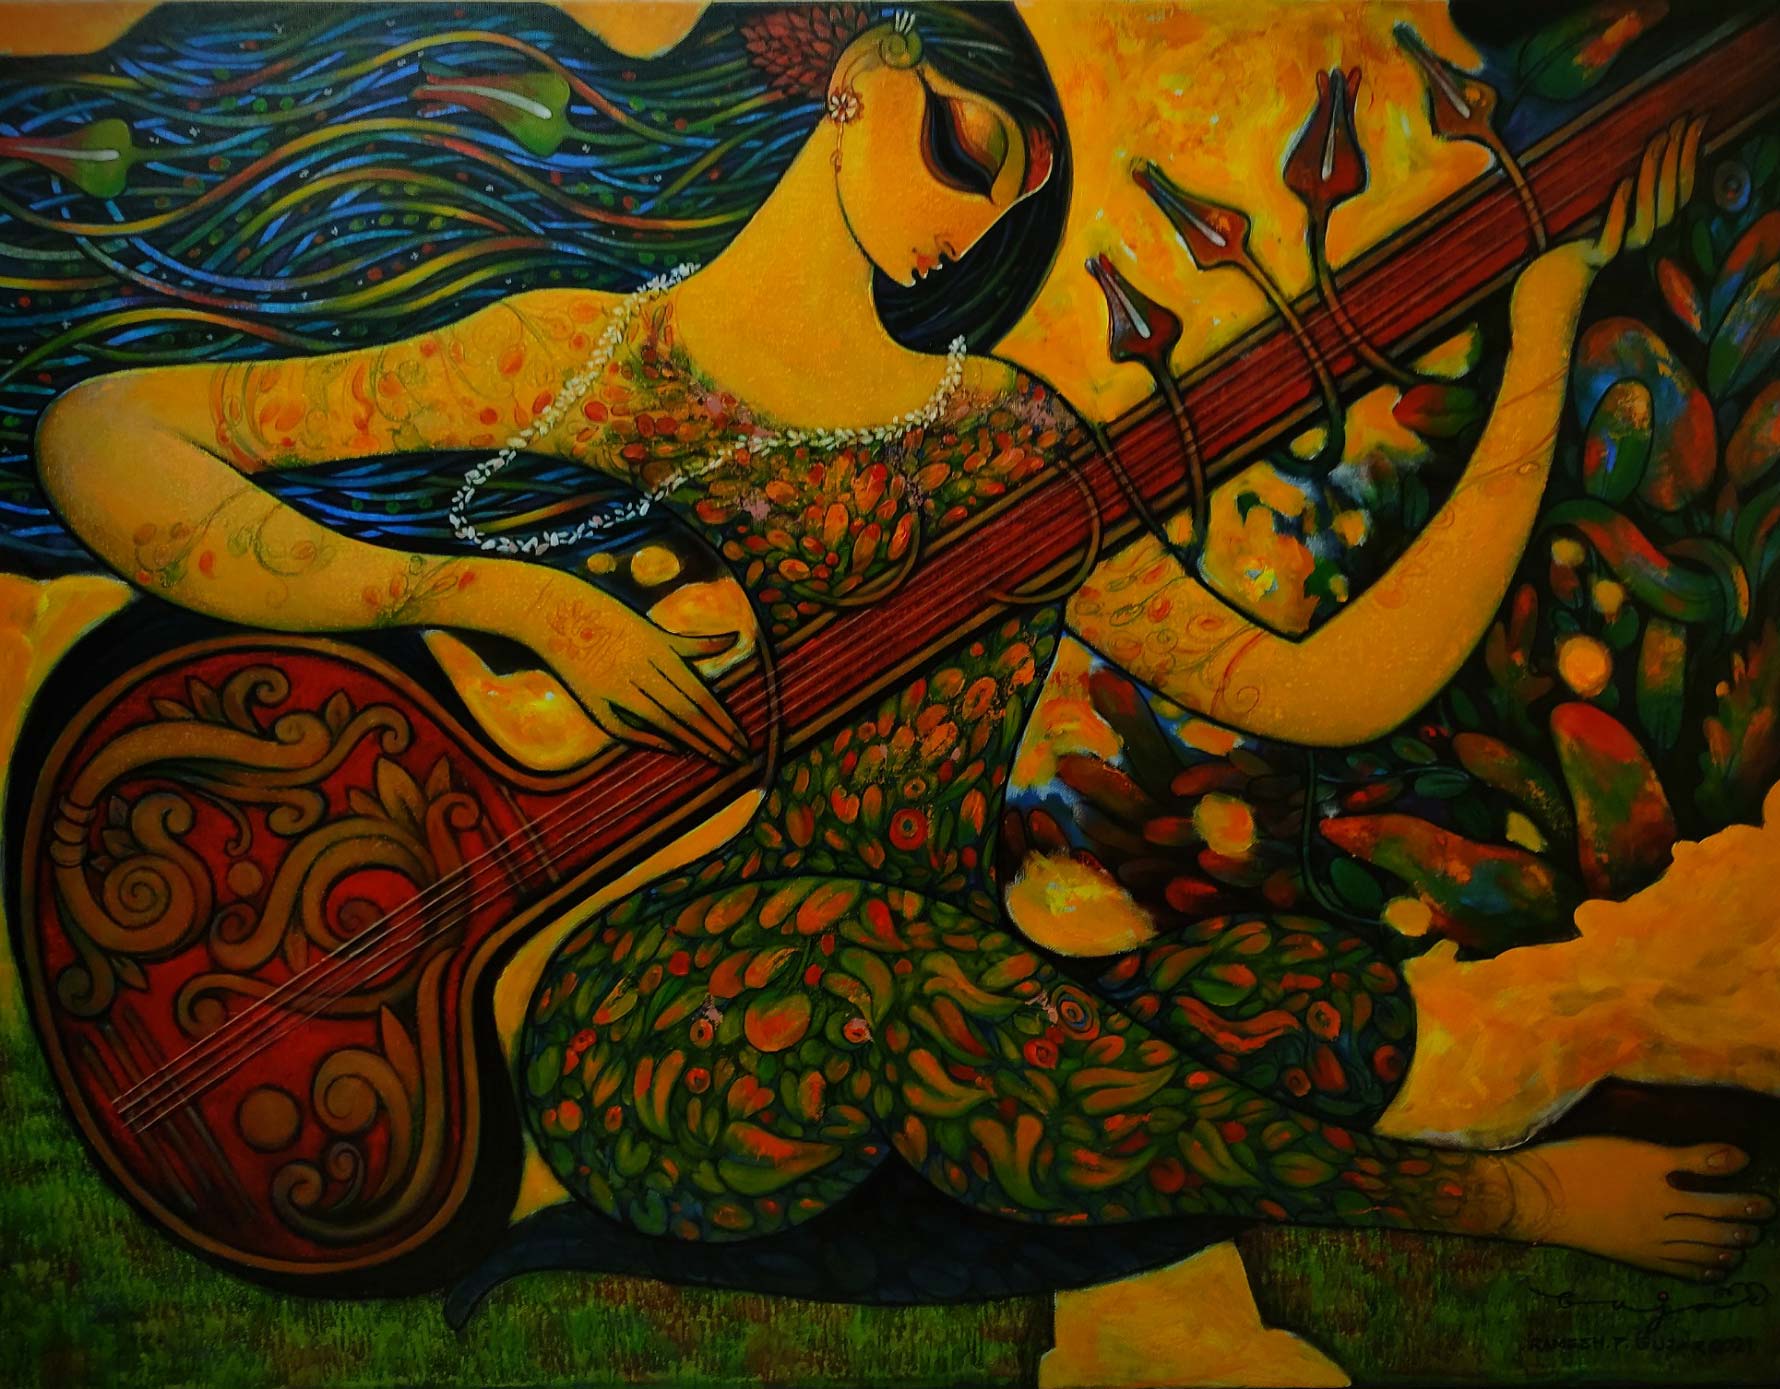 Figurative Painting with Acrylic on Canvas "Sitar-10" art by Ramesh P Gujar